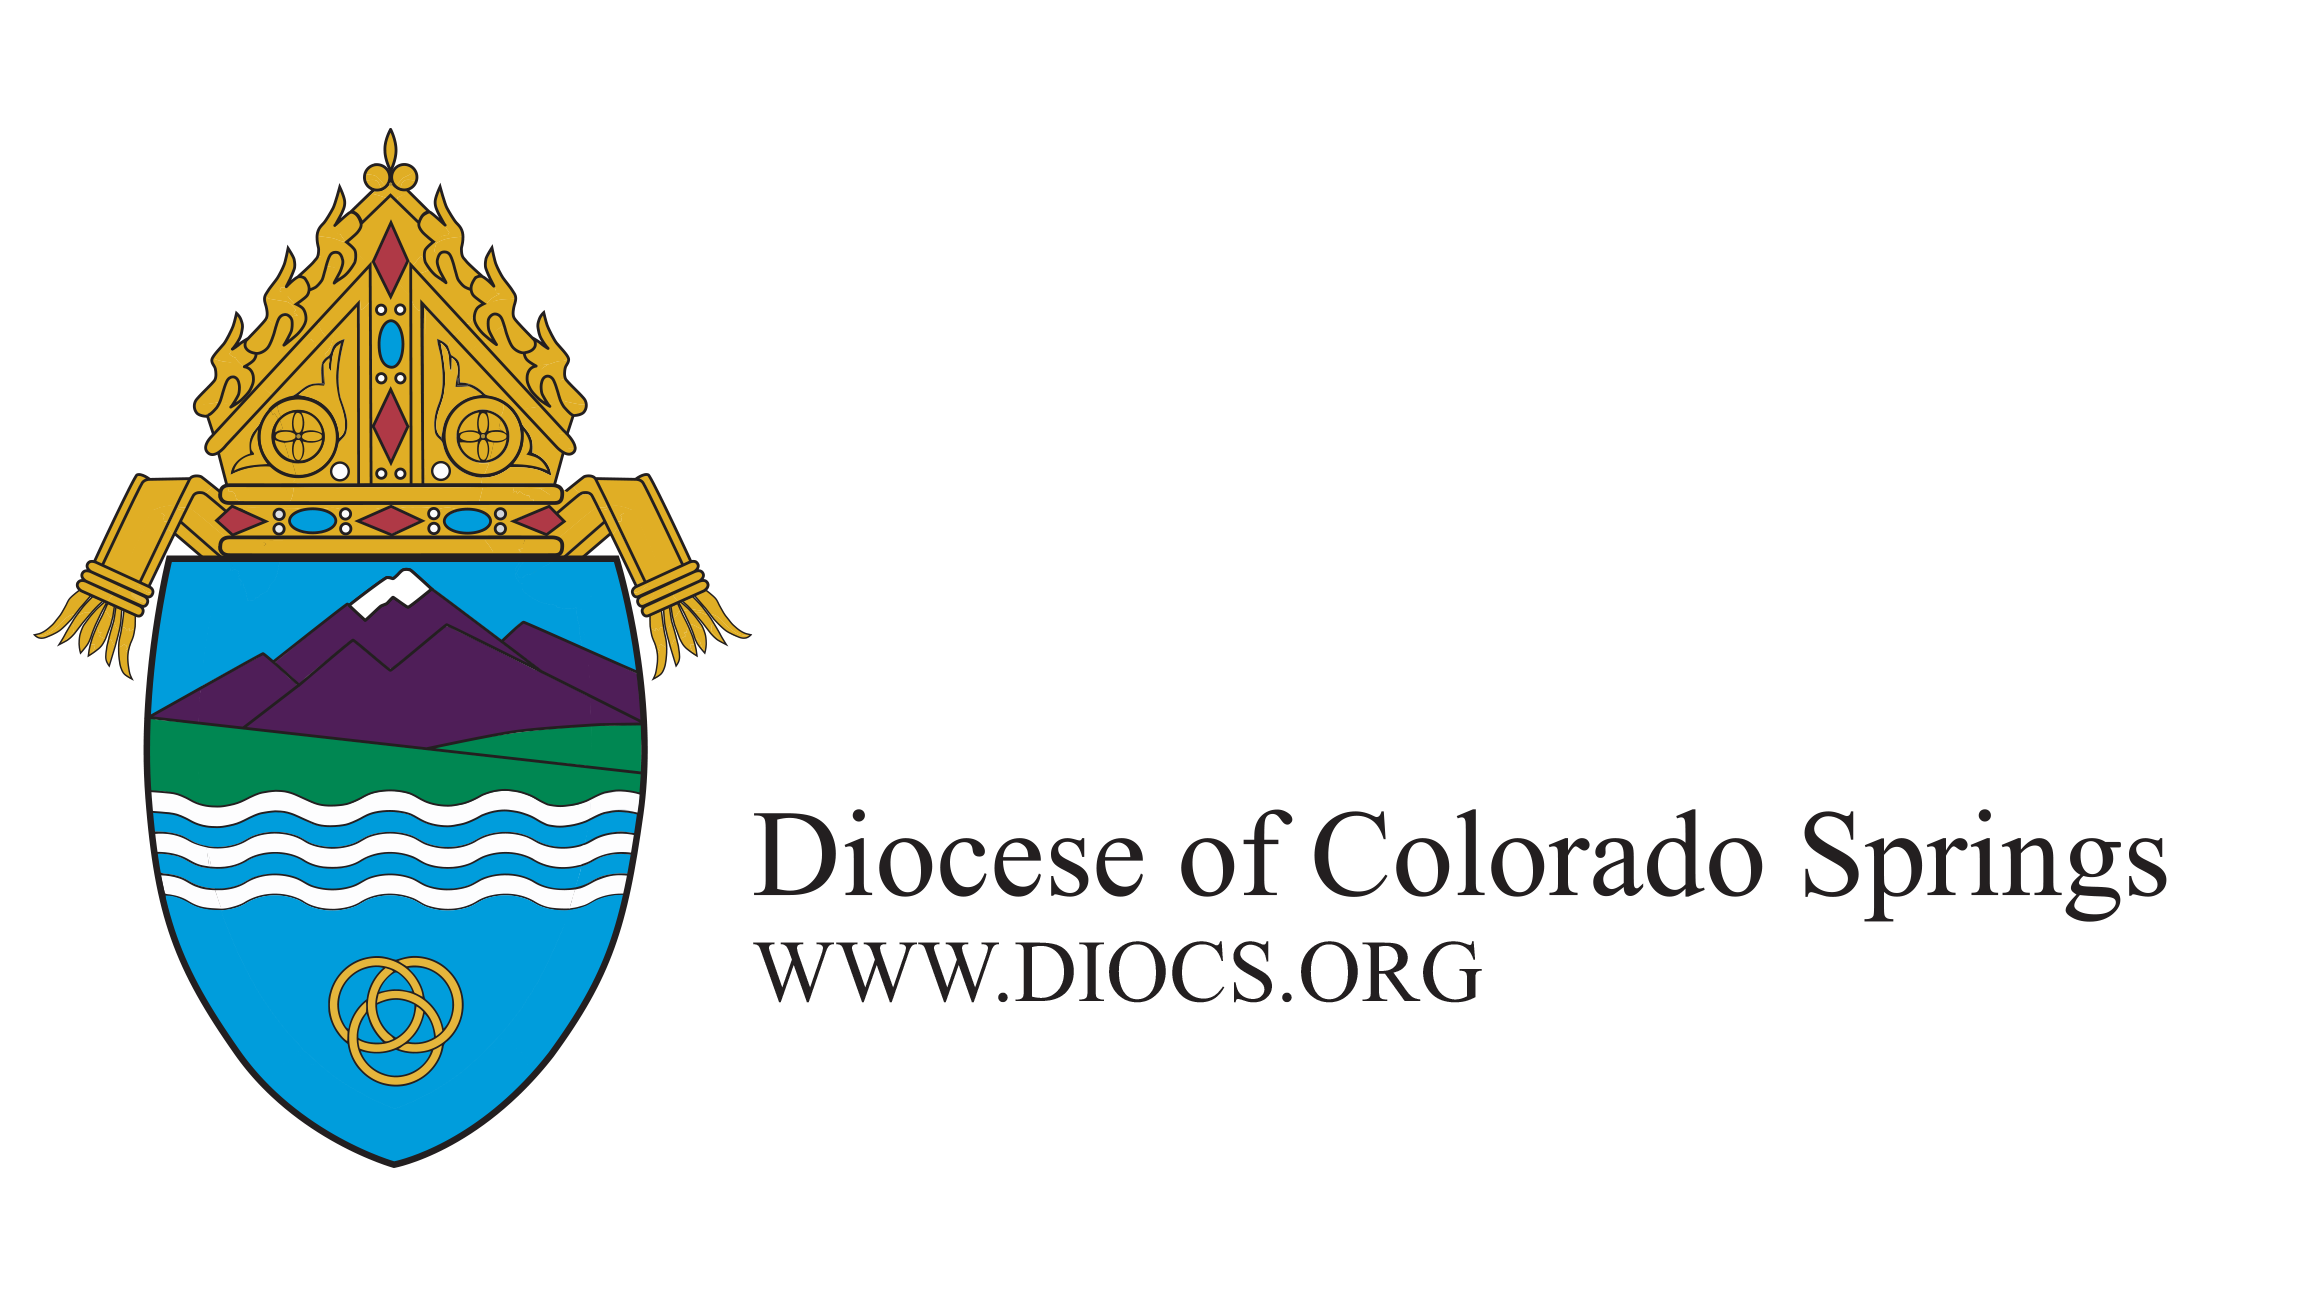 The Diocese of Colorado Springs